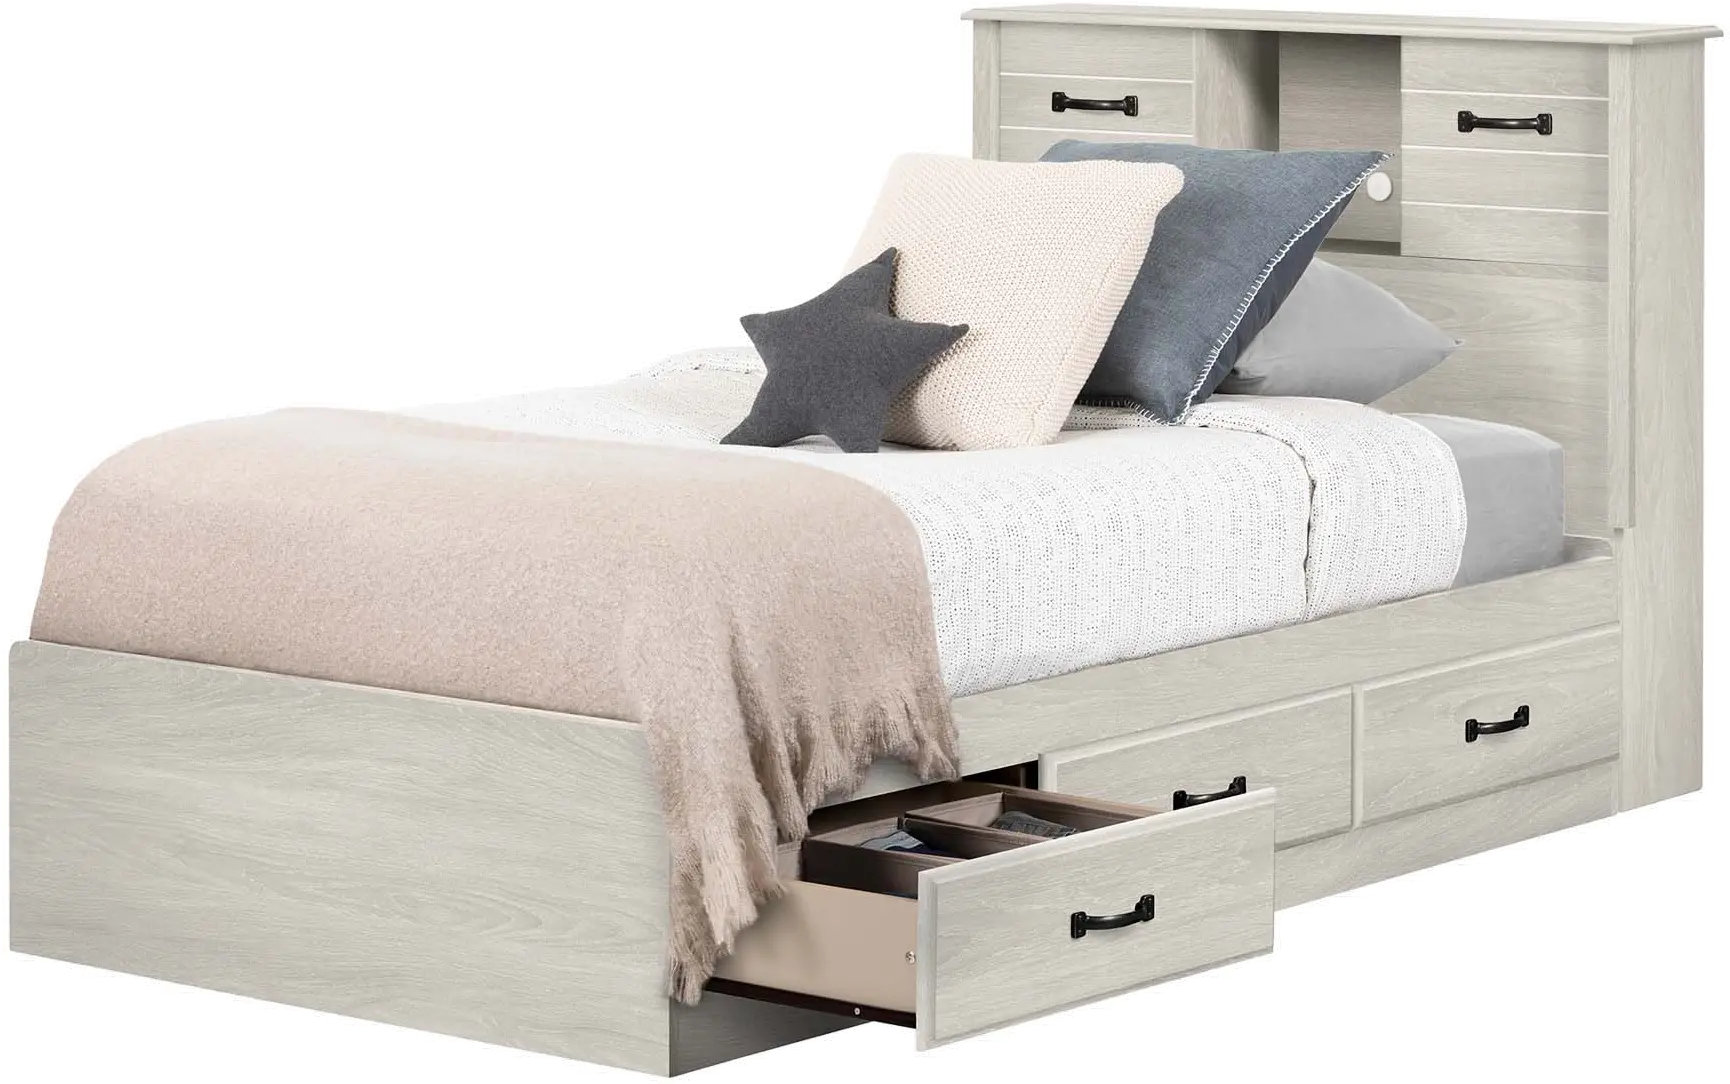 Ulysses Light Gray Twin Bed and Headboard Set - South Shore